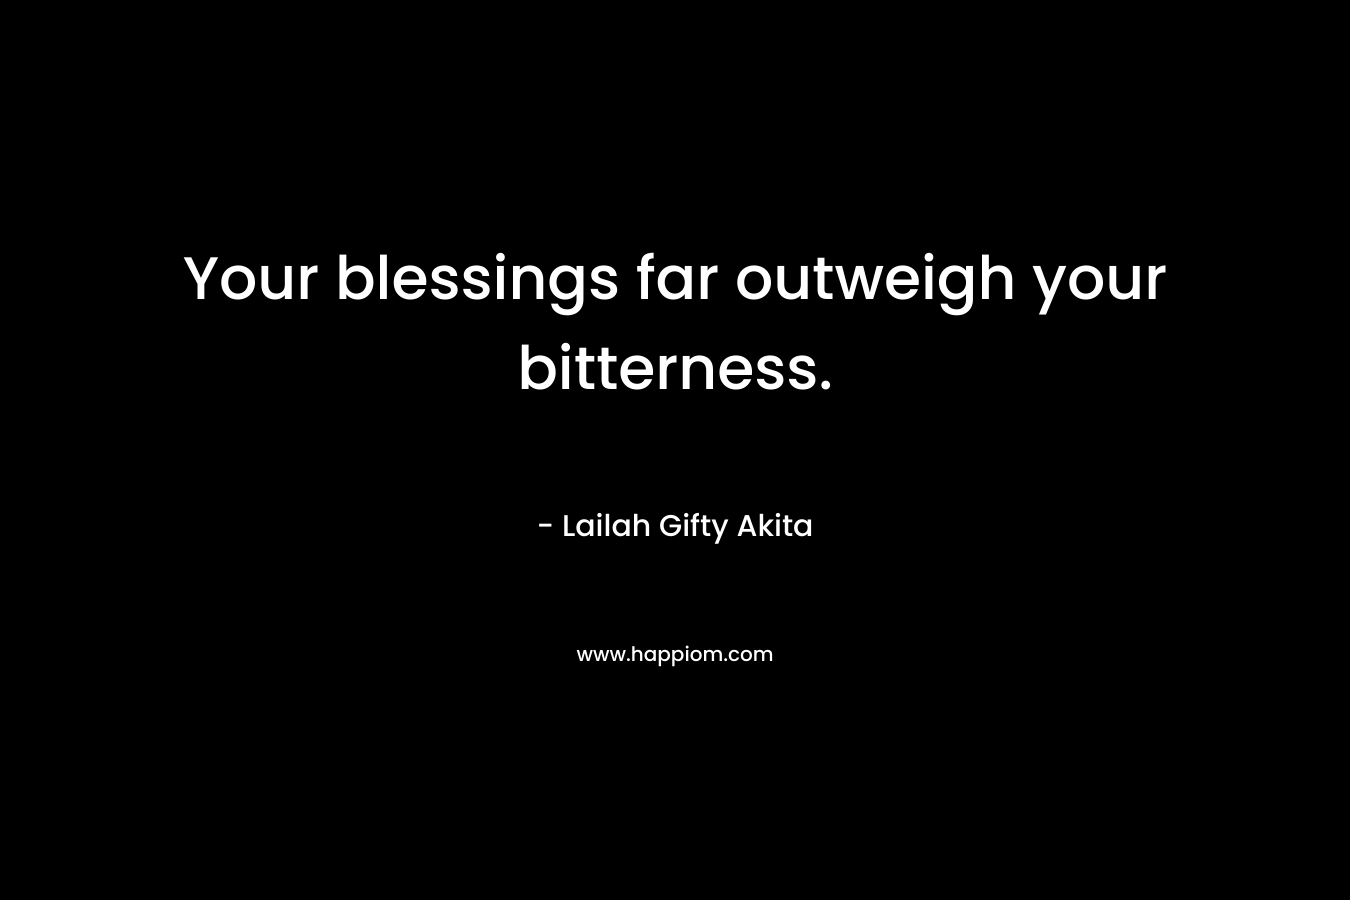 Your blessings far outweigh your bitterness.